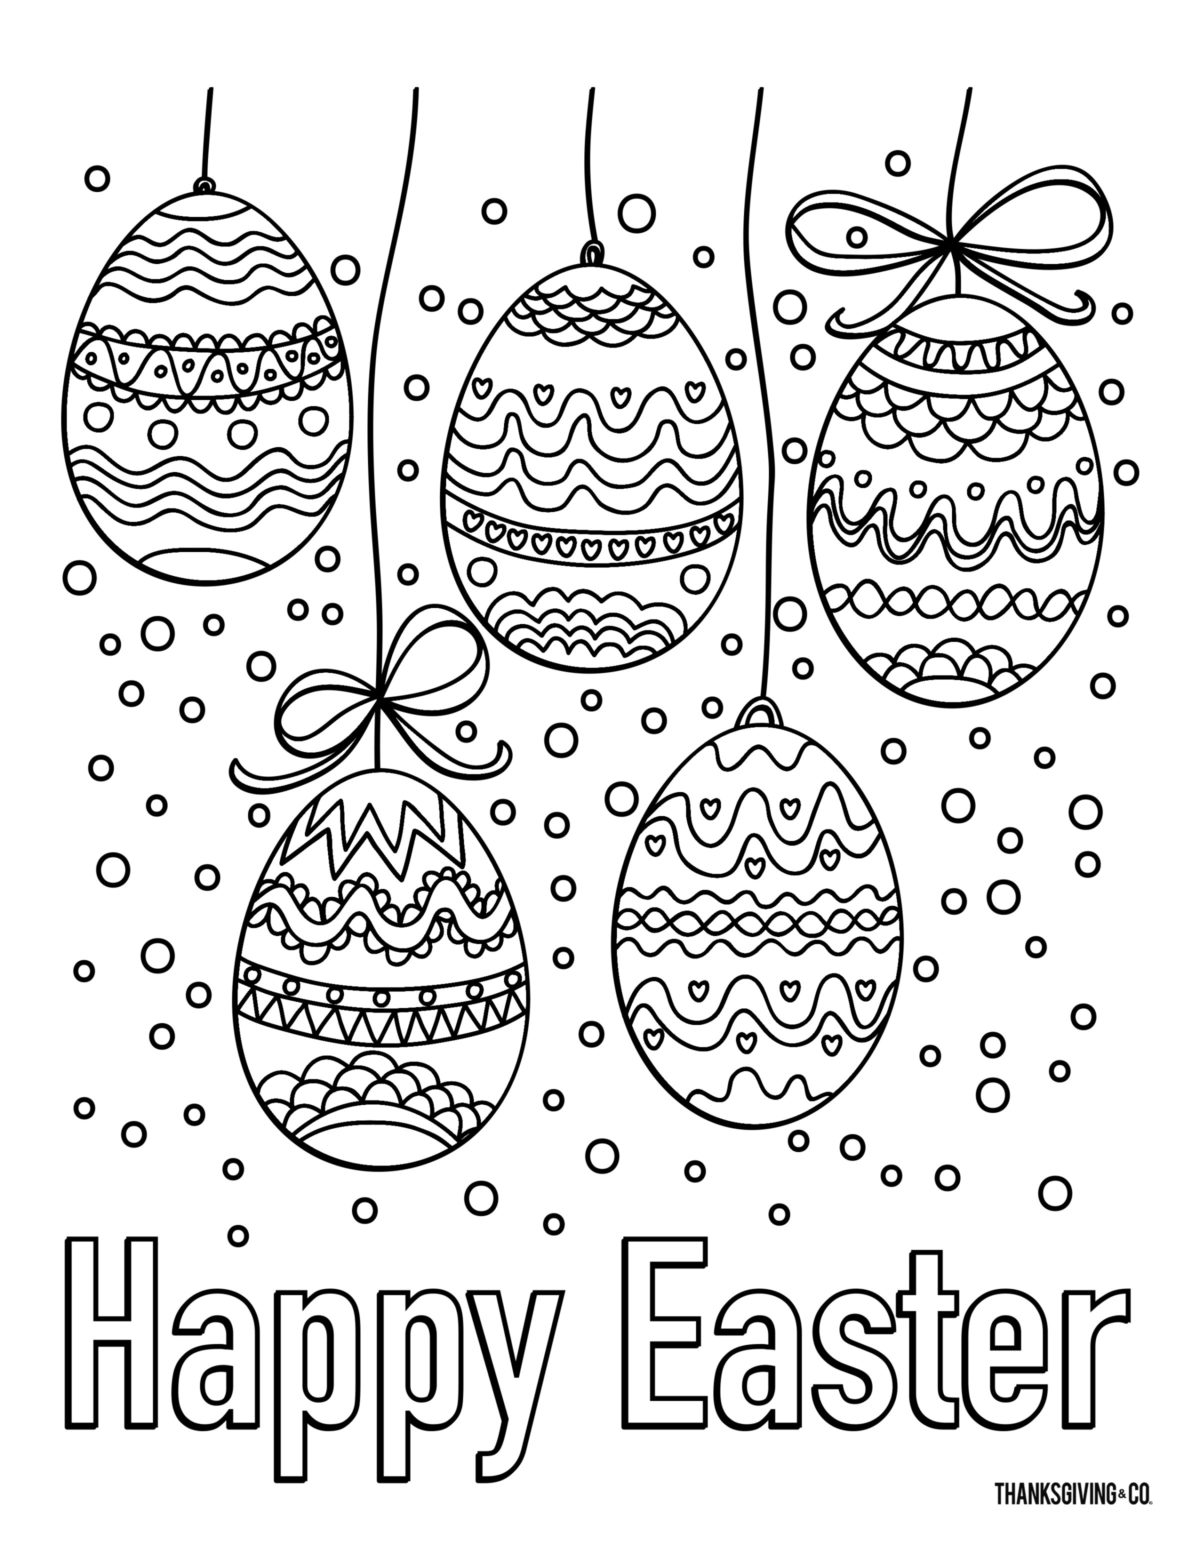 Easter ColoringBook Adult 2